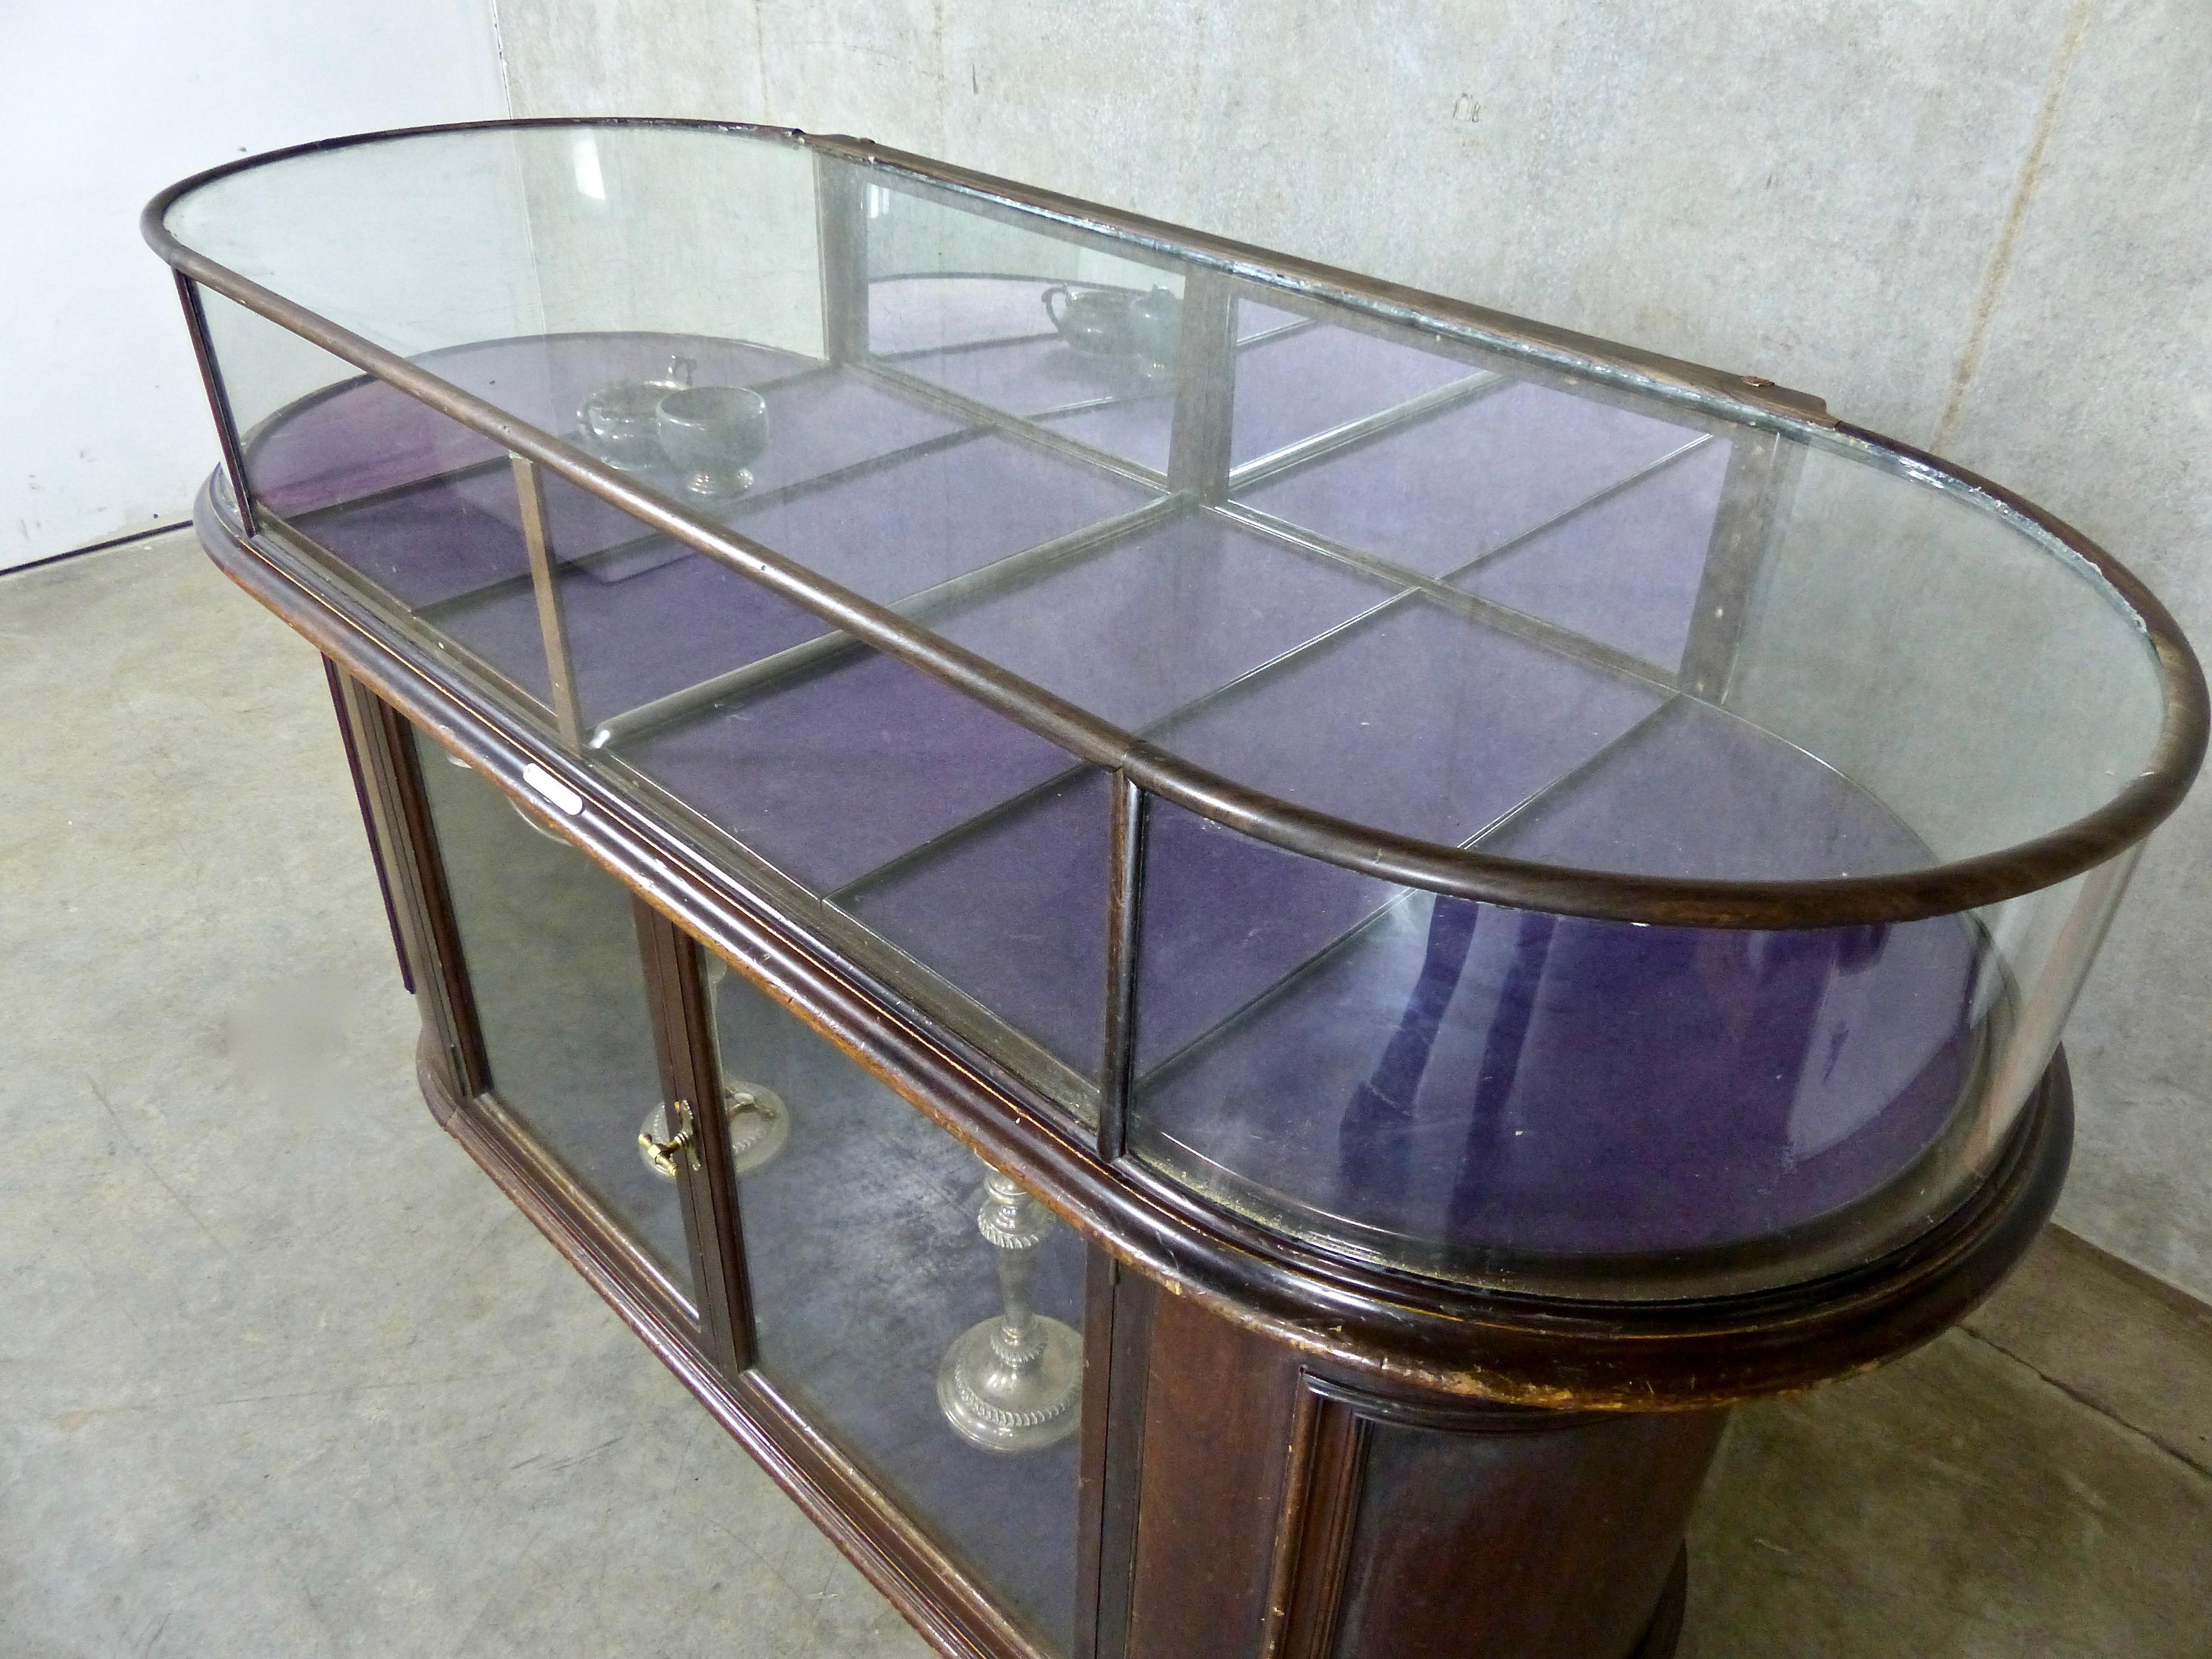 A beautiful curved glass and mahogany mercantile cabinet, circa 1900, made by John Curtis and Son Shop Fitters, Leeds, England. It was likely designed to display jewelry and silver ware as it includes six removable, purple felt-lined trays. The